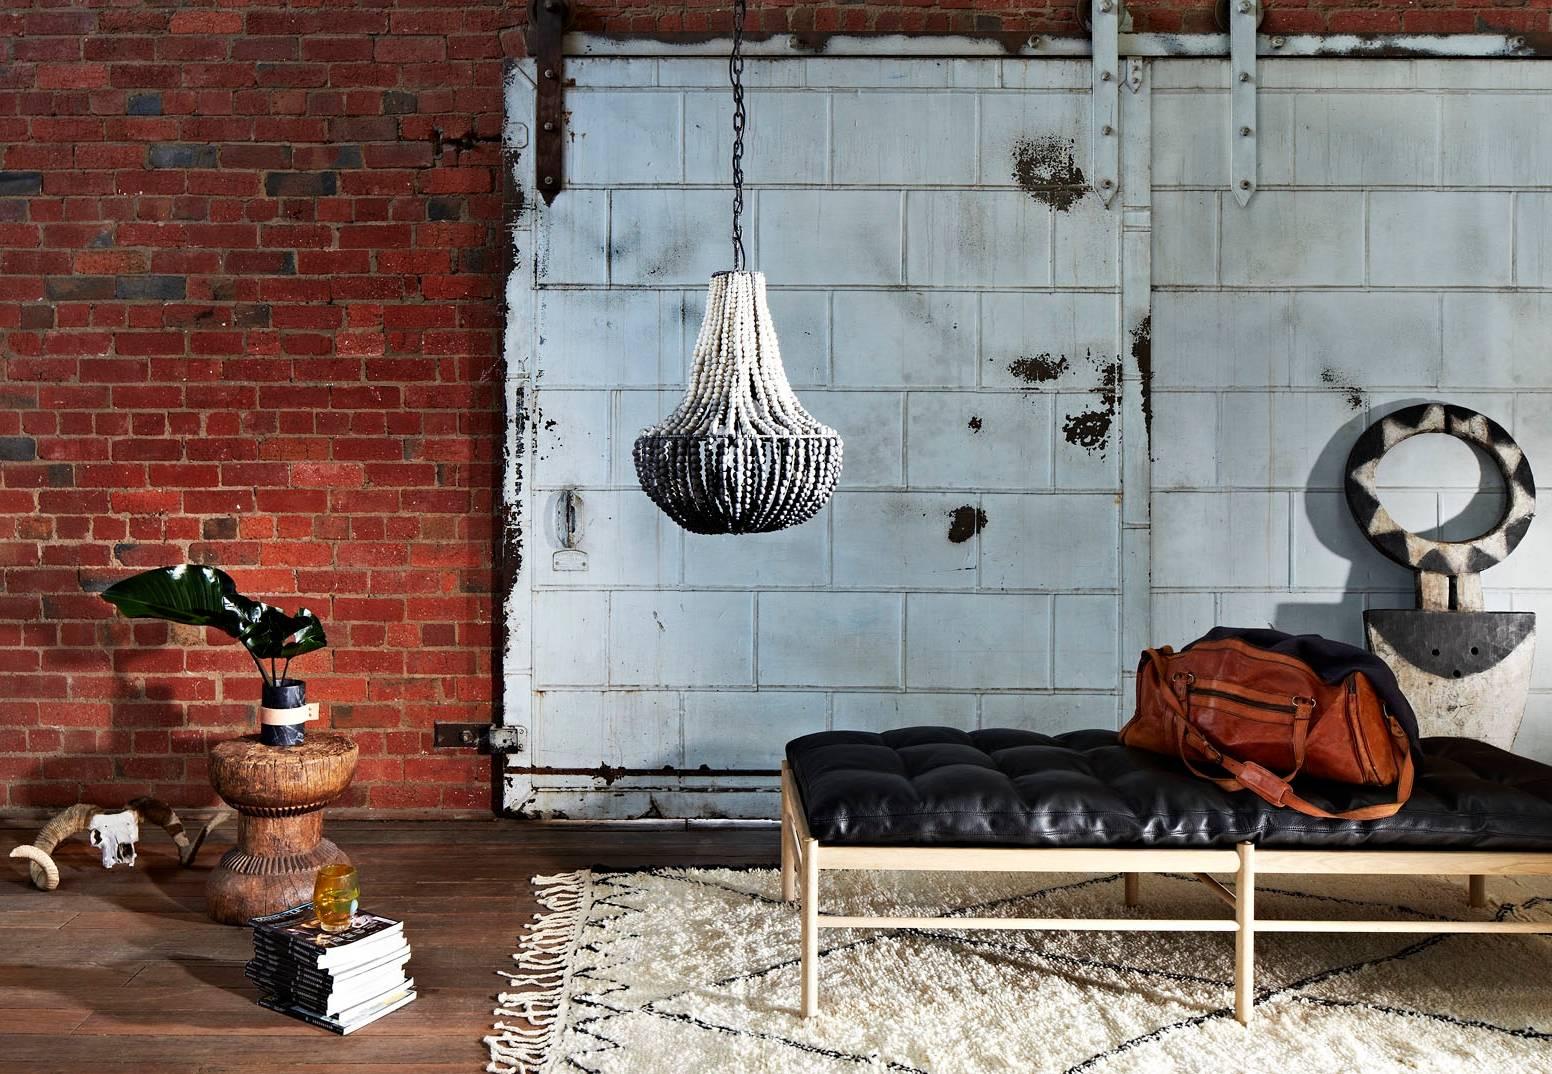 The klaylife 'L.I.M' is our most minimal handmade clay beaded chandelier, for those who prefer modern pendant lighting and clean lines.

With each clay bead hand rolled, kiln fired, then dip dyed before being strung onto a wrought iron frame, this